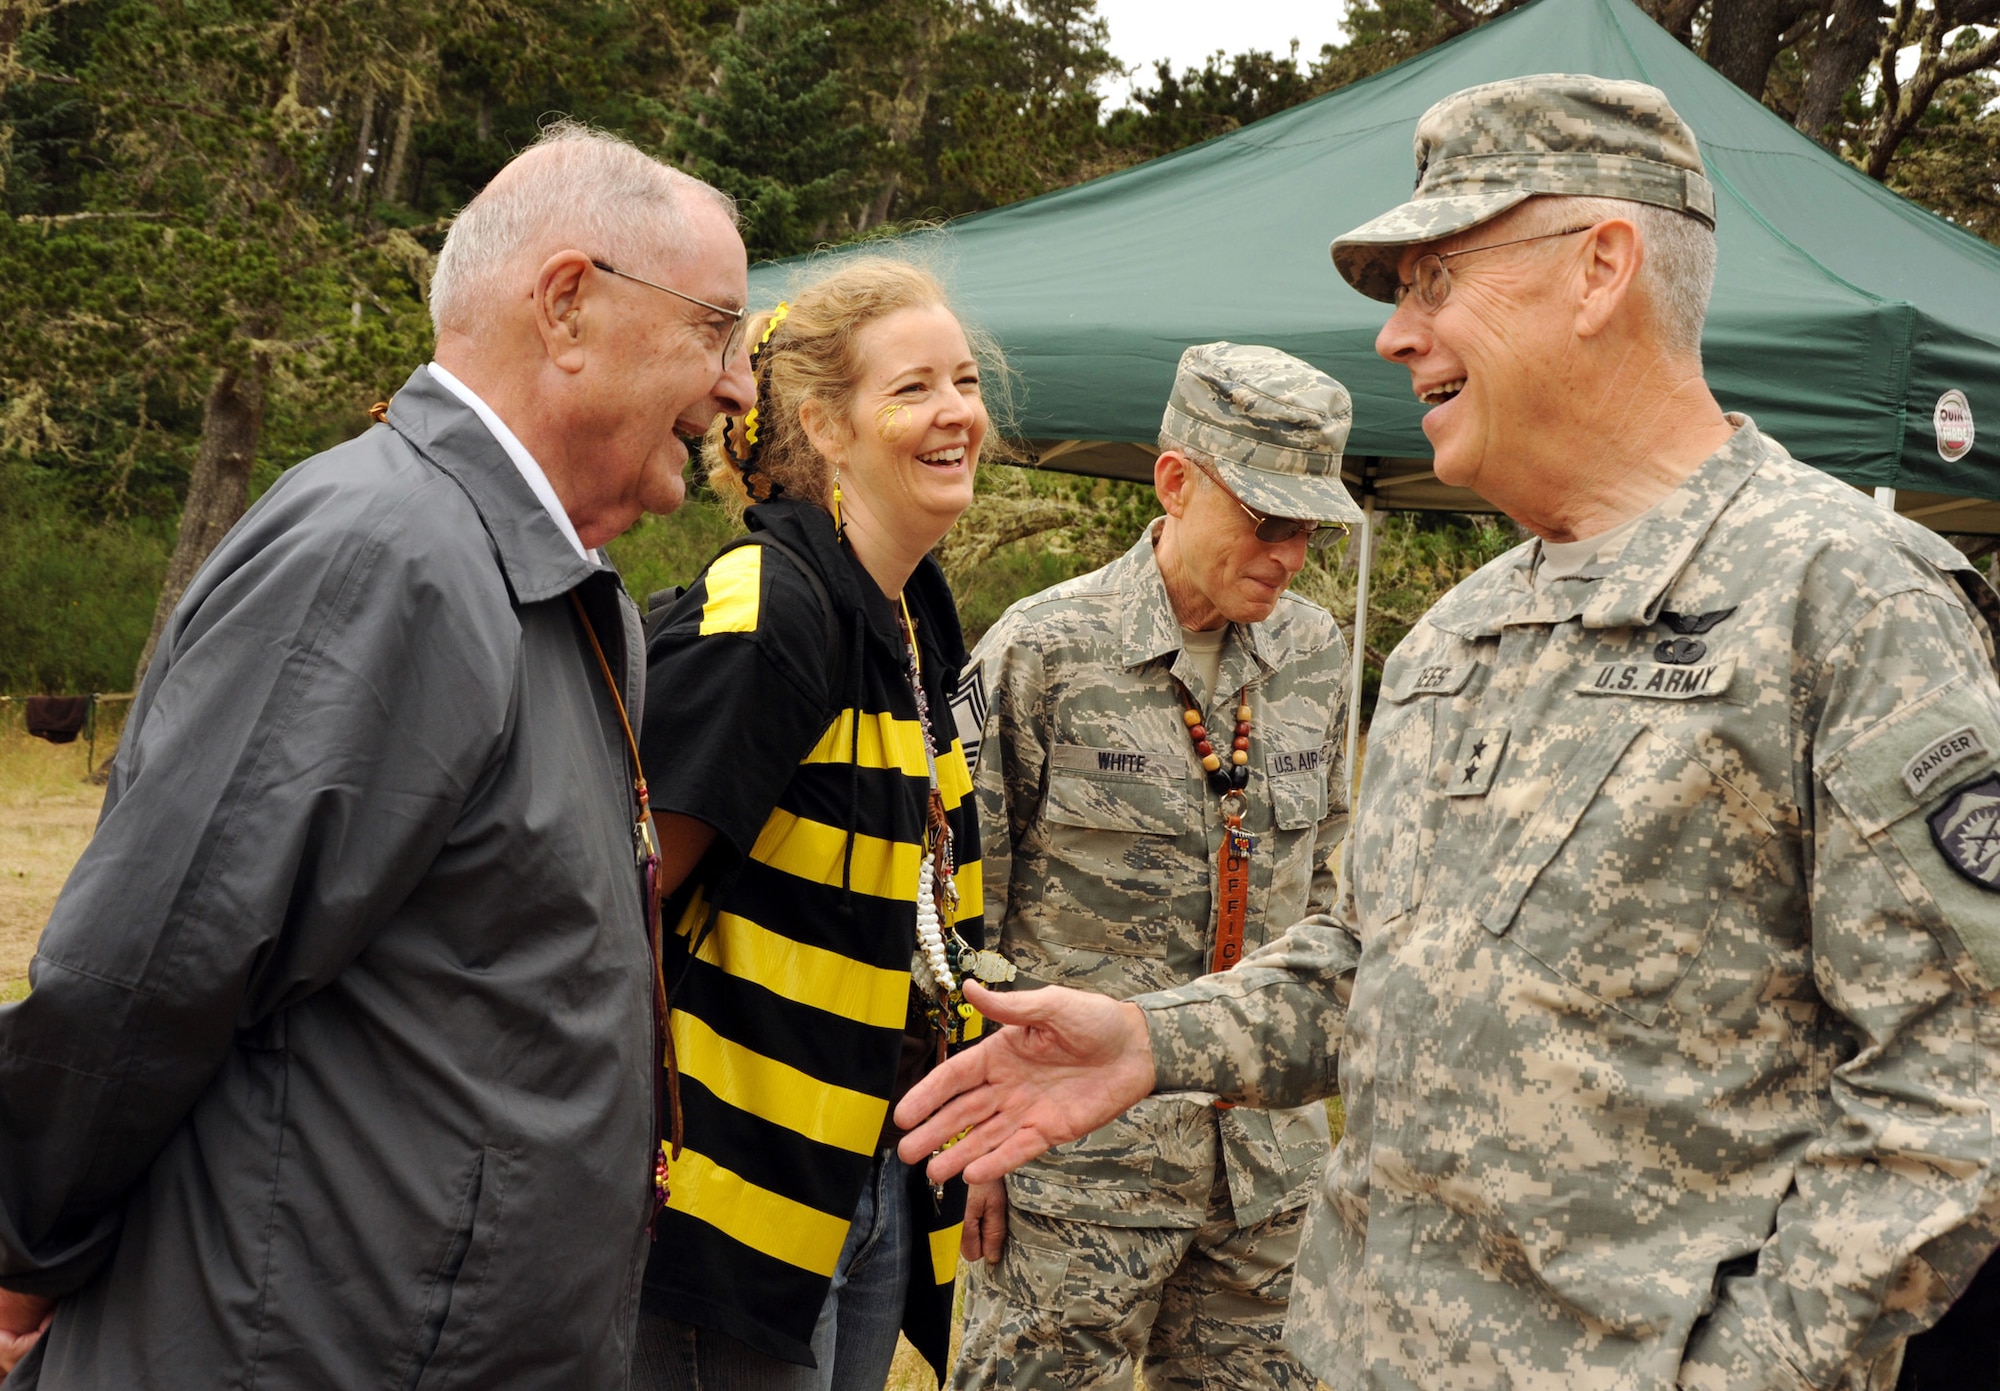 Former Oregon Governor Victor Atiyeh (far left), shares a story about the history of Camp Rosenbaum with (left to right) Leslie Crehan from the Portland Housing Authority, Chief Master Sgt. Max White, 142nd Fighter Wing, and Major General Raymond F. Rees, Adjutant General for the State of Oregon on V.I.G. day at Camp Rosenbaum, held at Camp Rilea, Ore., on July 27, 2011. Governor Atiyeh was one of many ‘Very Important Guest’ to visit the youth camp held each summer for the past 41 years. (U.S. Air Force photograph by Tech. Sgt. John Hughel, 142nd Fighter Wing Public Affairs) (Released)